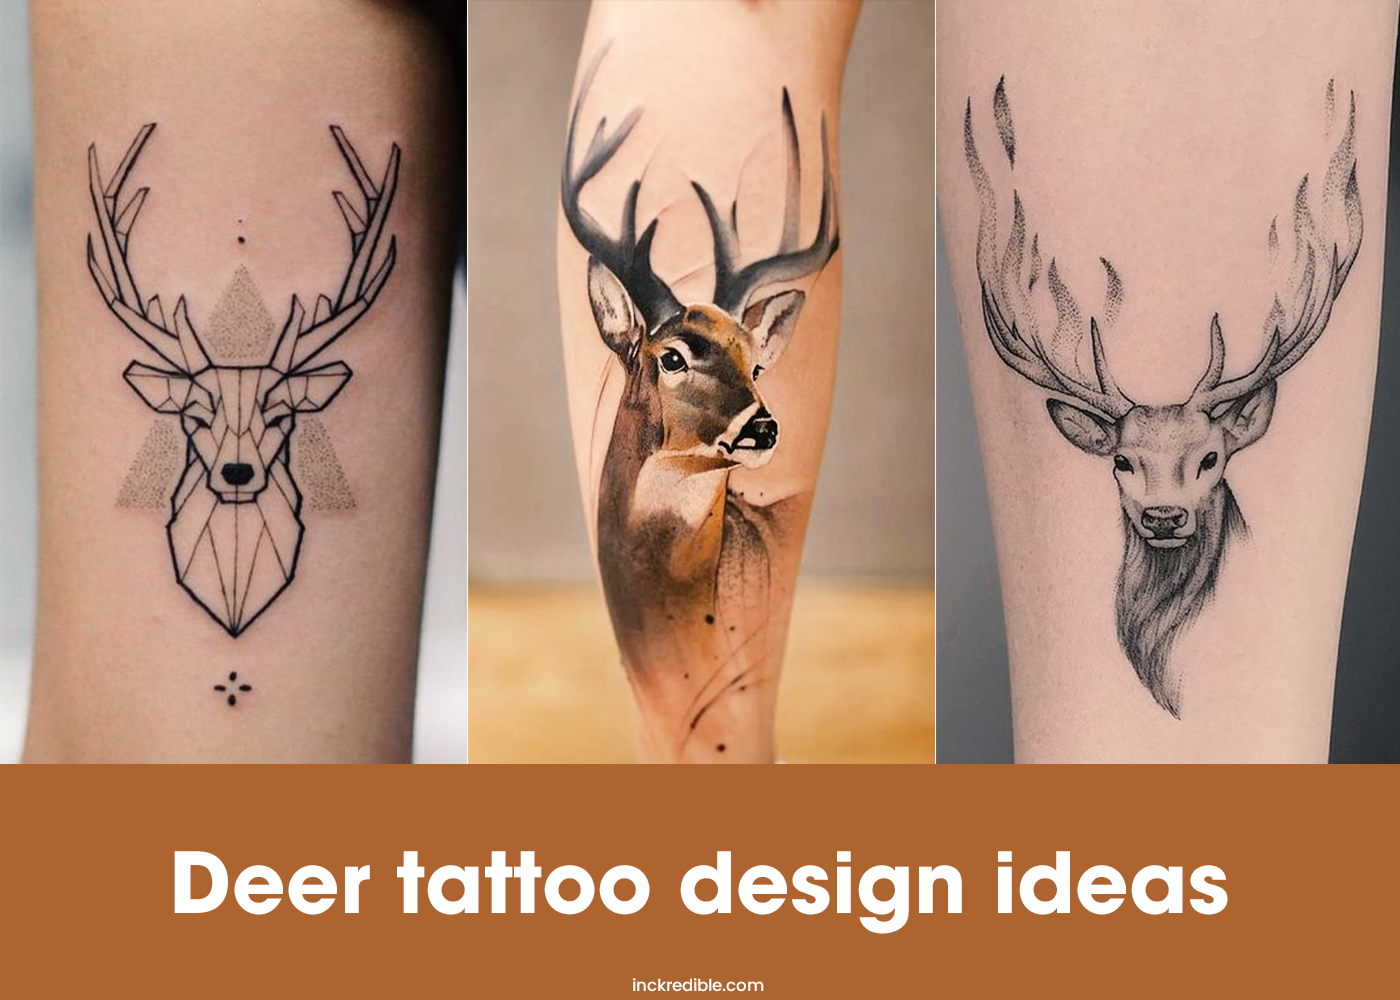 Being animal tattoos Sachin on Twitter Deer tattoo design If you are  looking for a symbol of gentleness anFor more info  visithttpstco0ioEkKGimU httpstcoiPcdpdsODn  Twitter